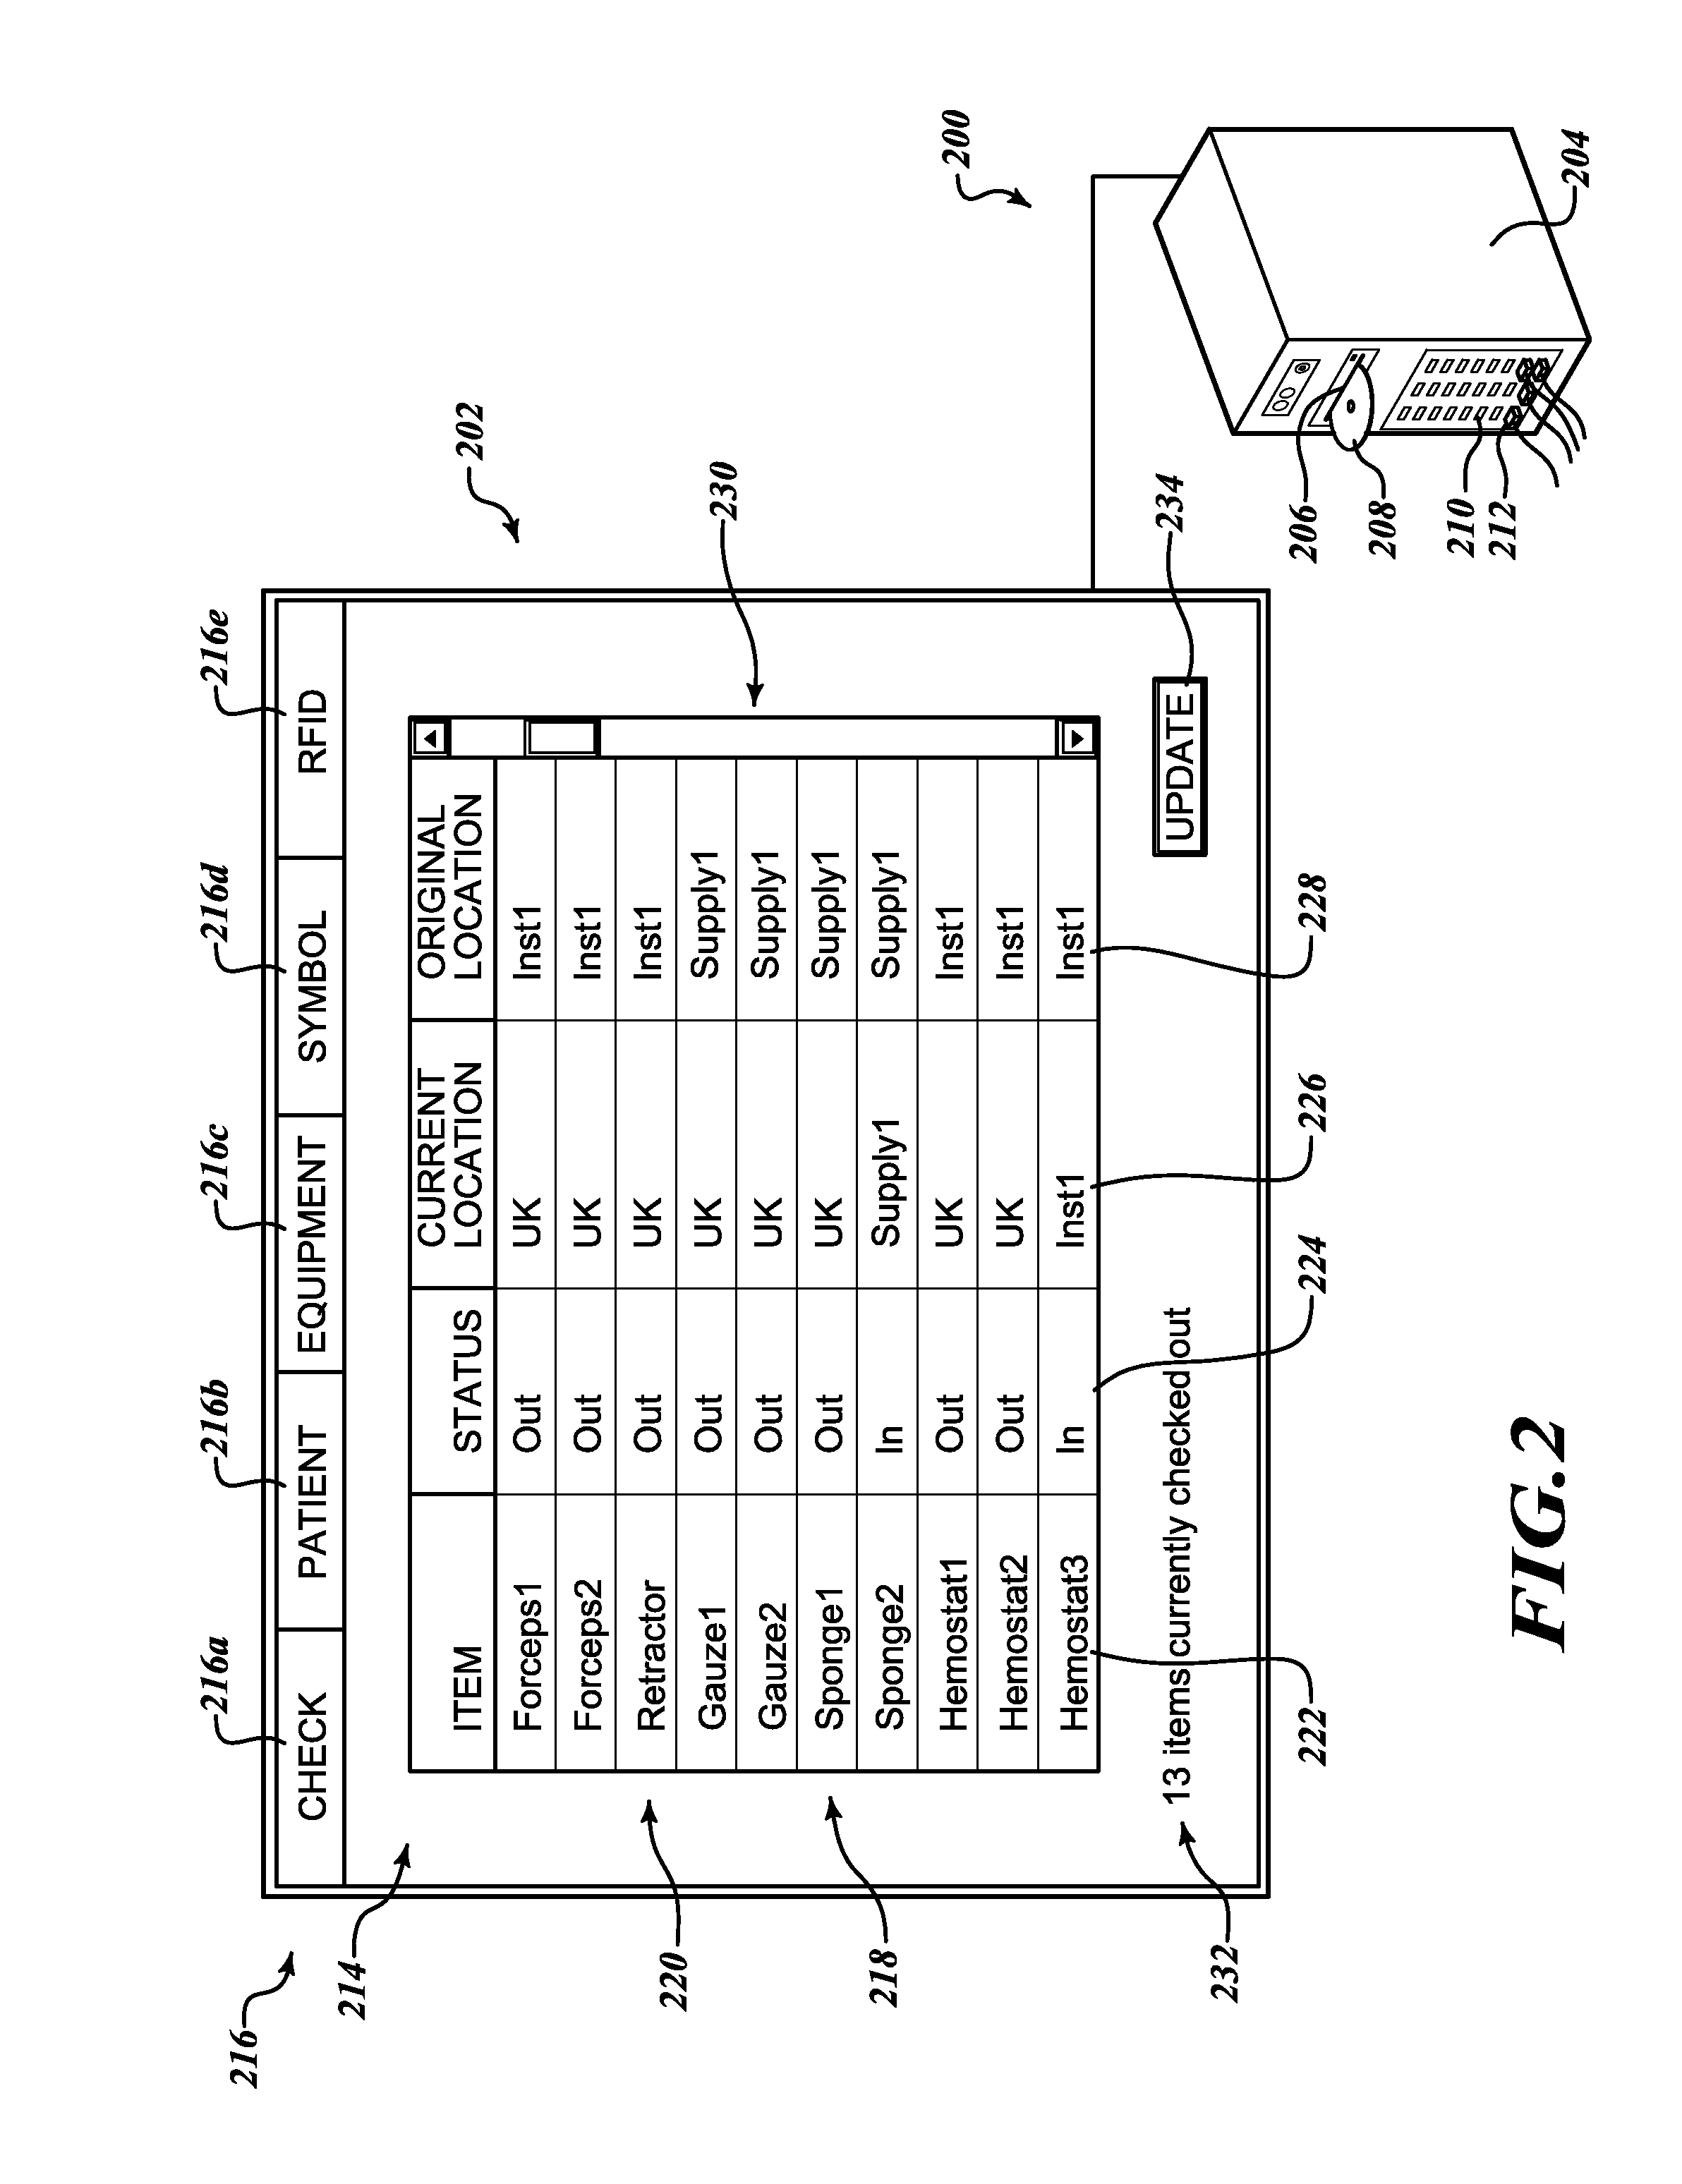 Method and apparatus to account for transponder tagged objects used during medical procedures